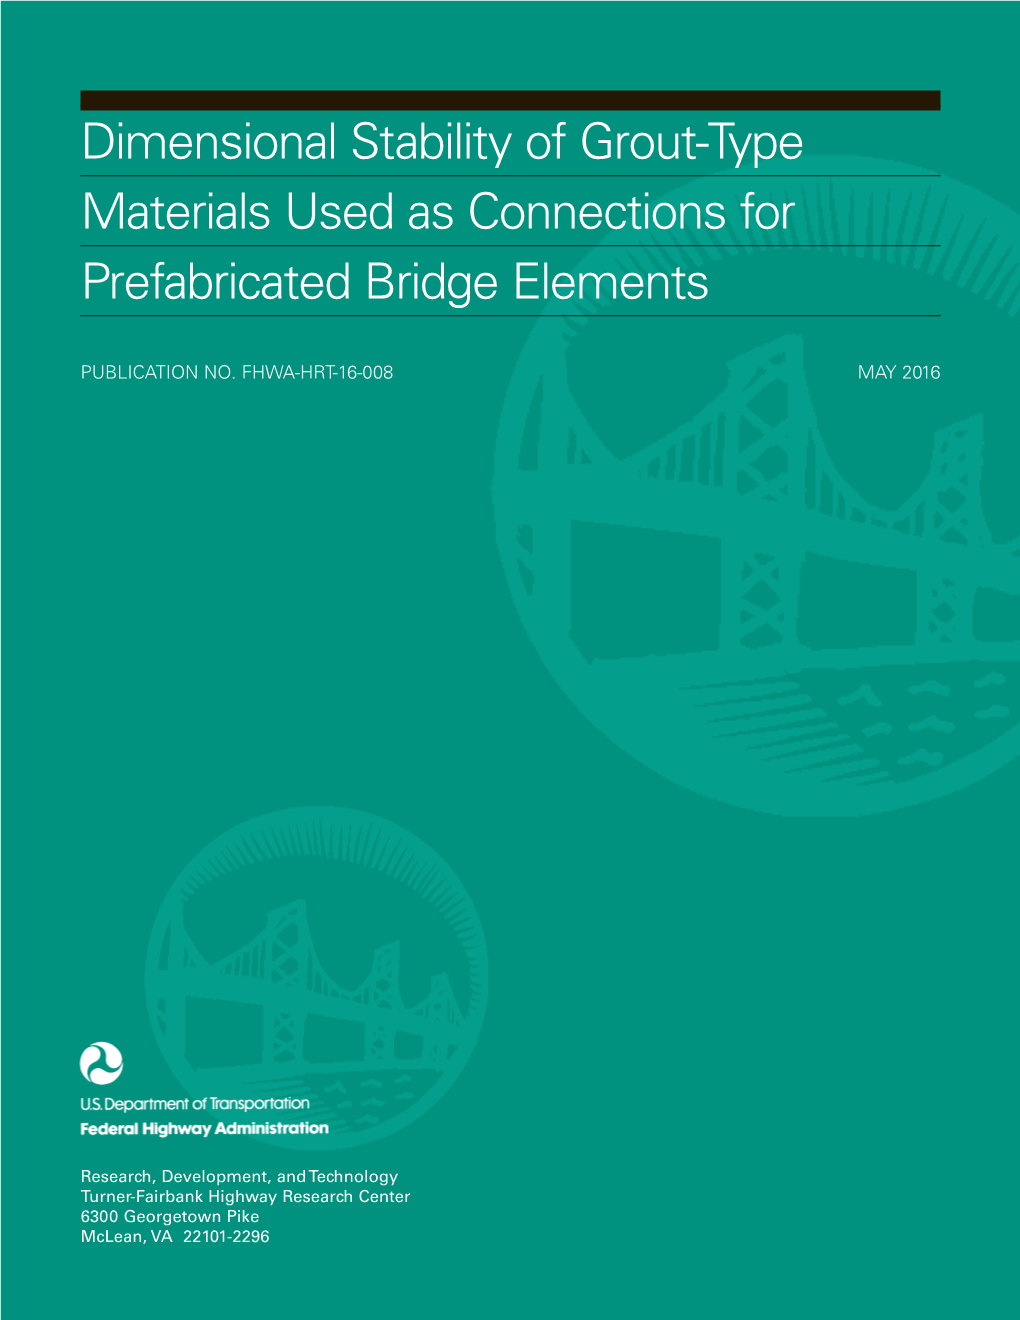 Dimensional Stability of Grout-Type Materials Used As Connections for Prefabricated Bridge Elements